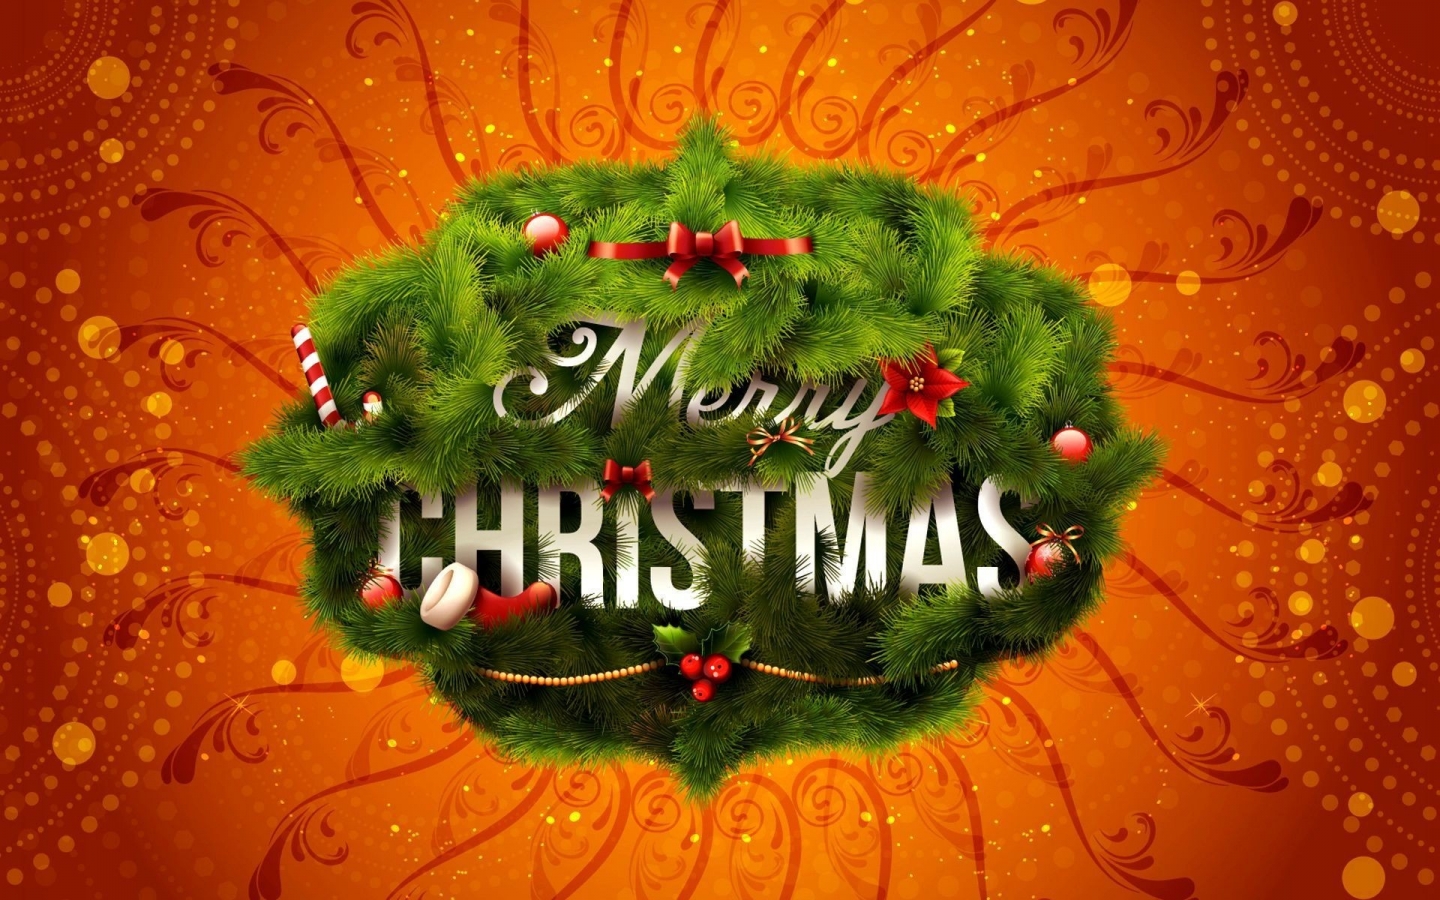 Merry Christmas Wreath for 1440 x 900 widescreen resolution